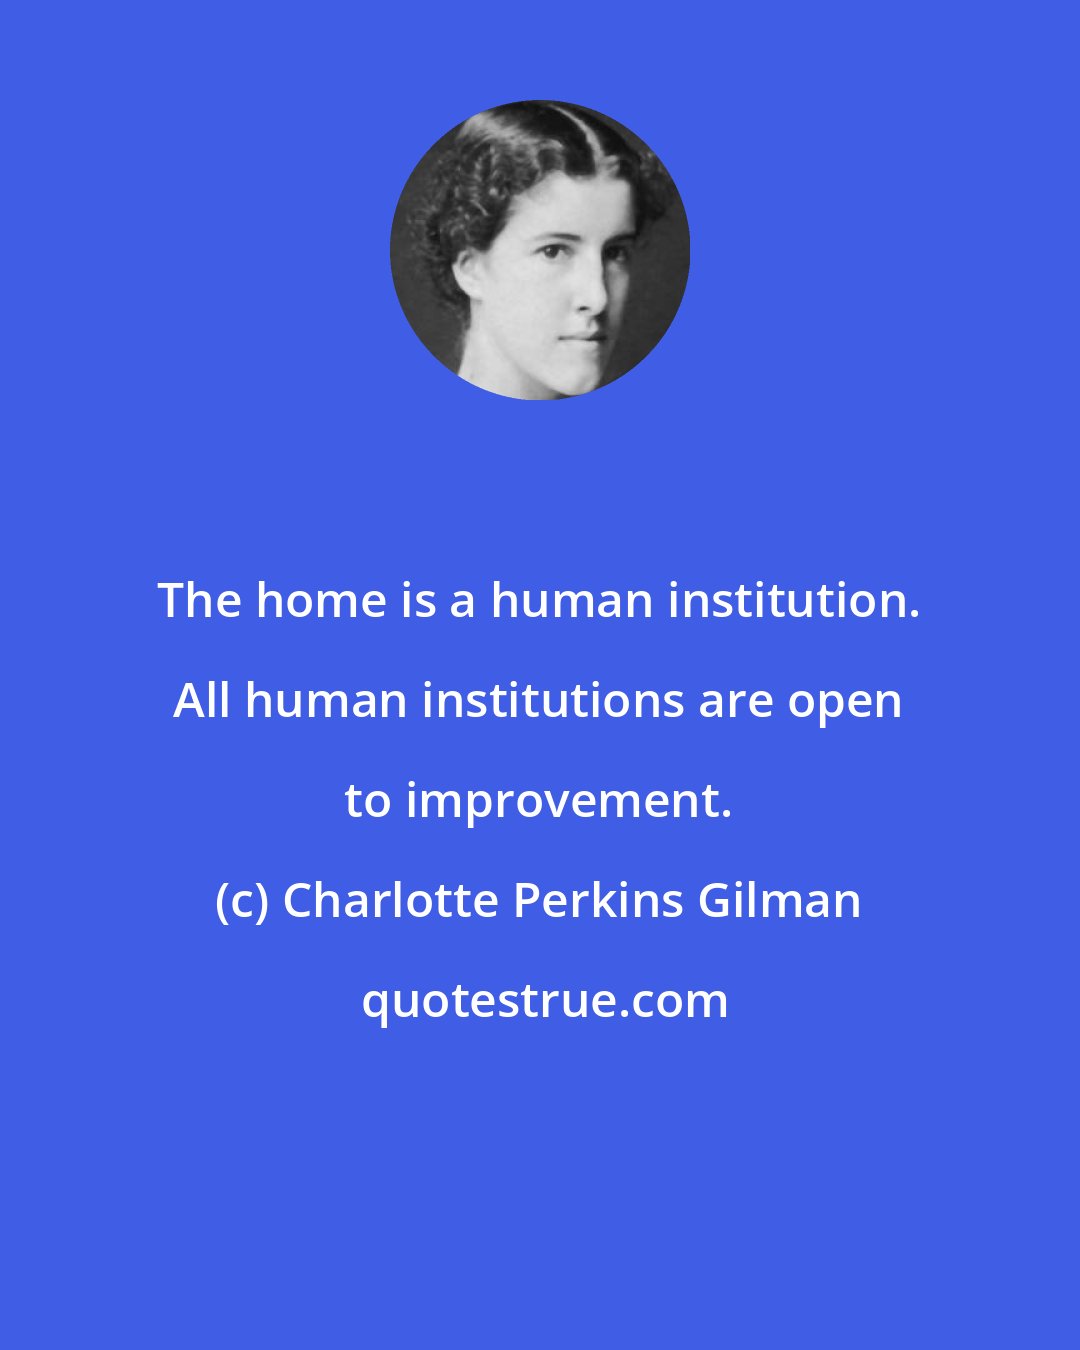 Charlotte Perkins Gilman: The home is a human institution. All human institutions are open to improvement.